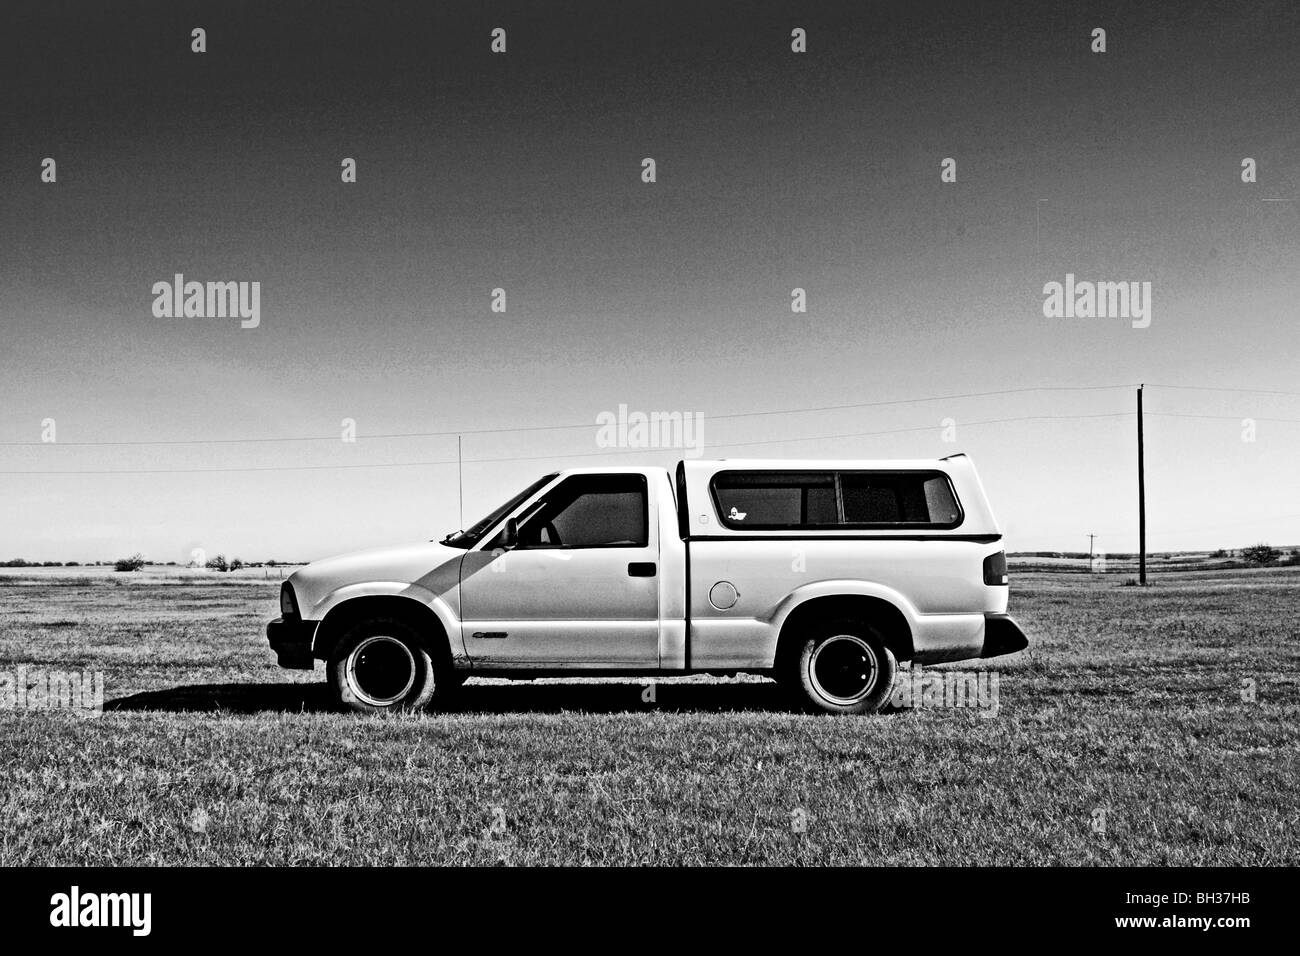 Older model 1994 Chevrolet pick up stands in dramatic contrast to the fresh, clean, clear atmosphere of the expansive grass land Stock Photo